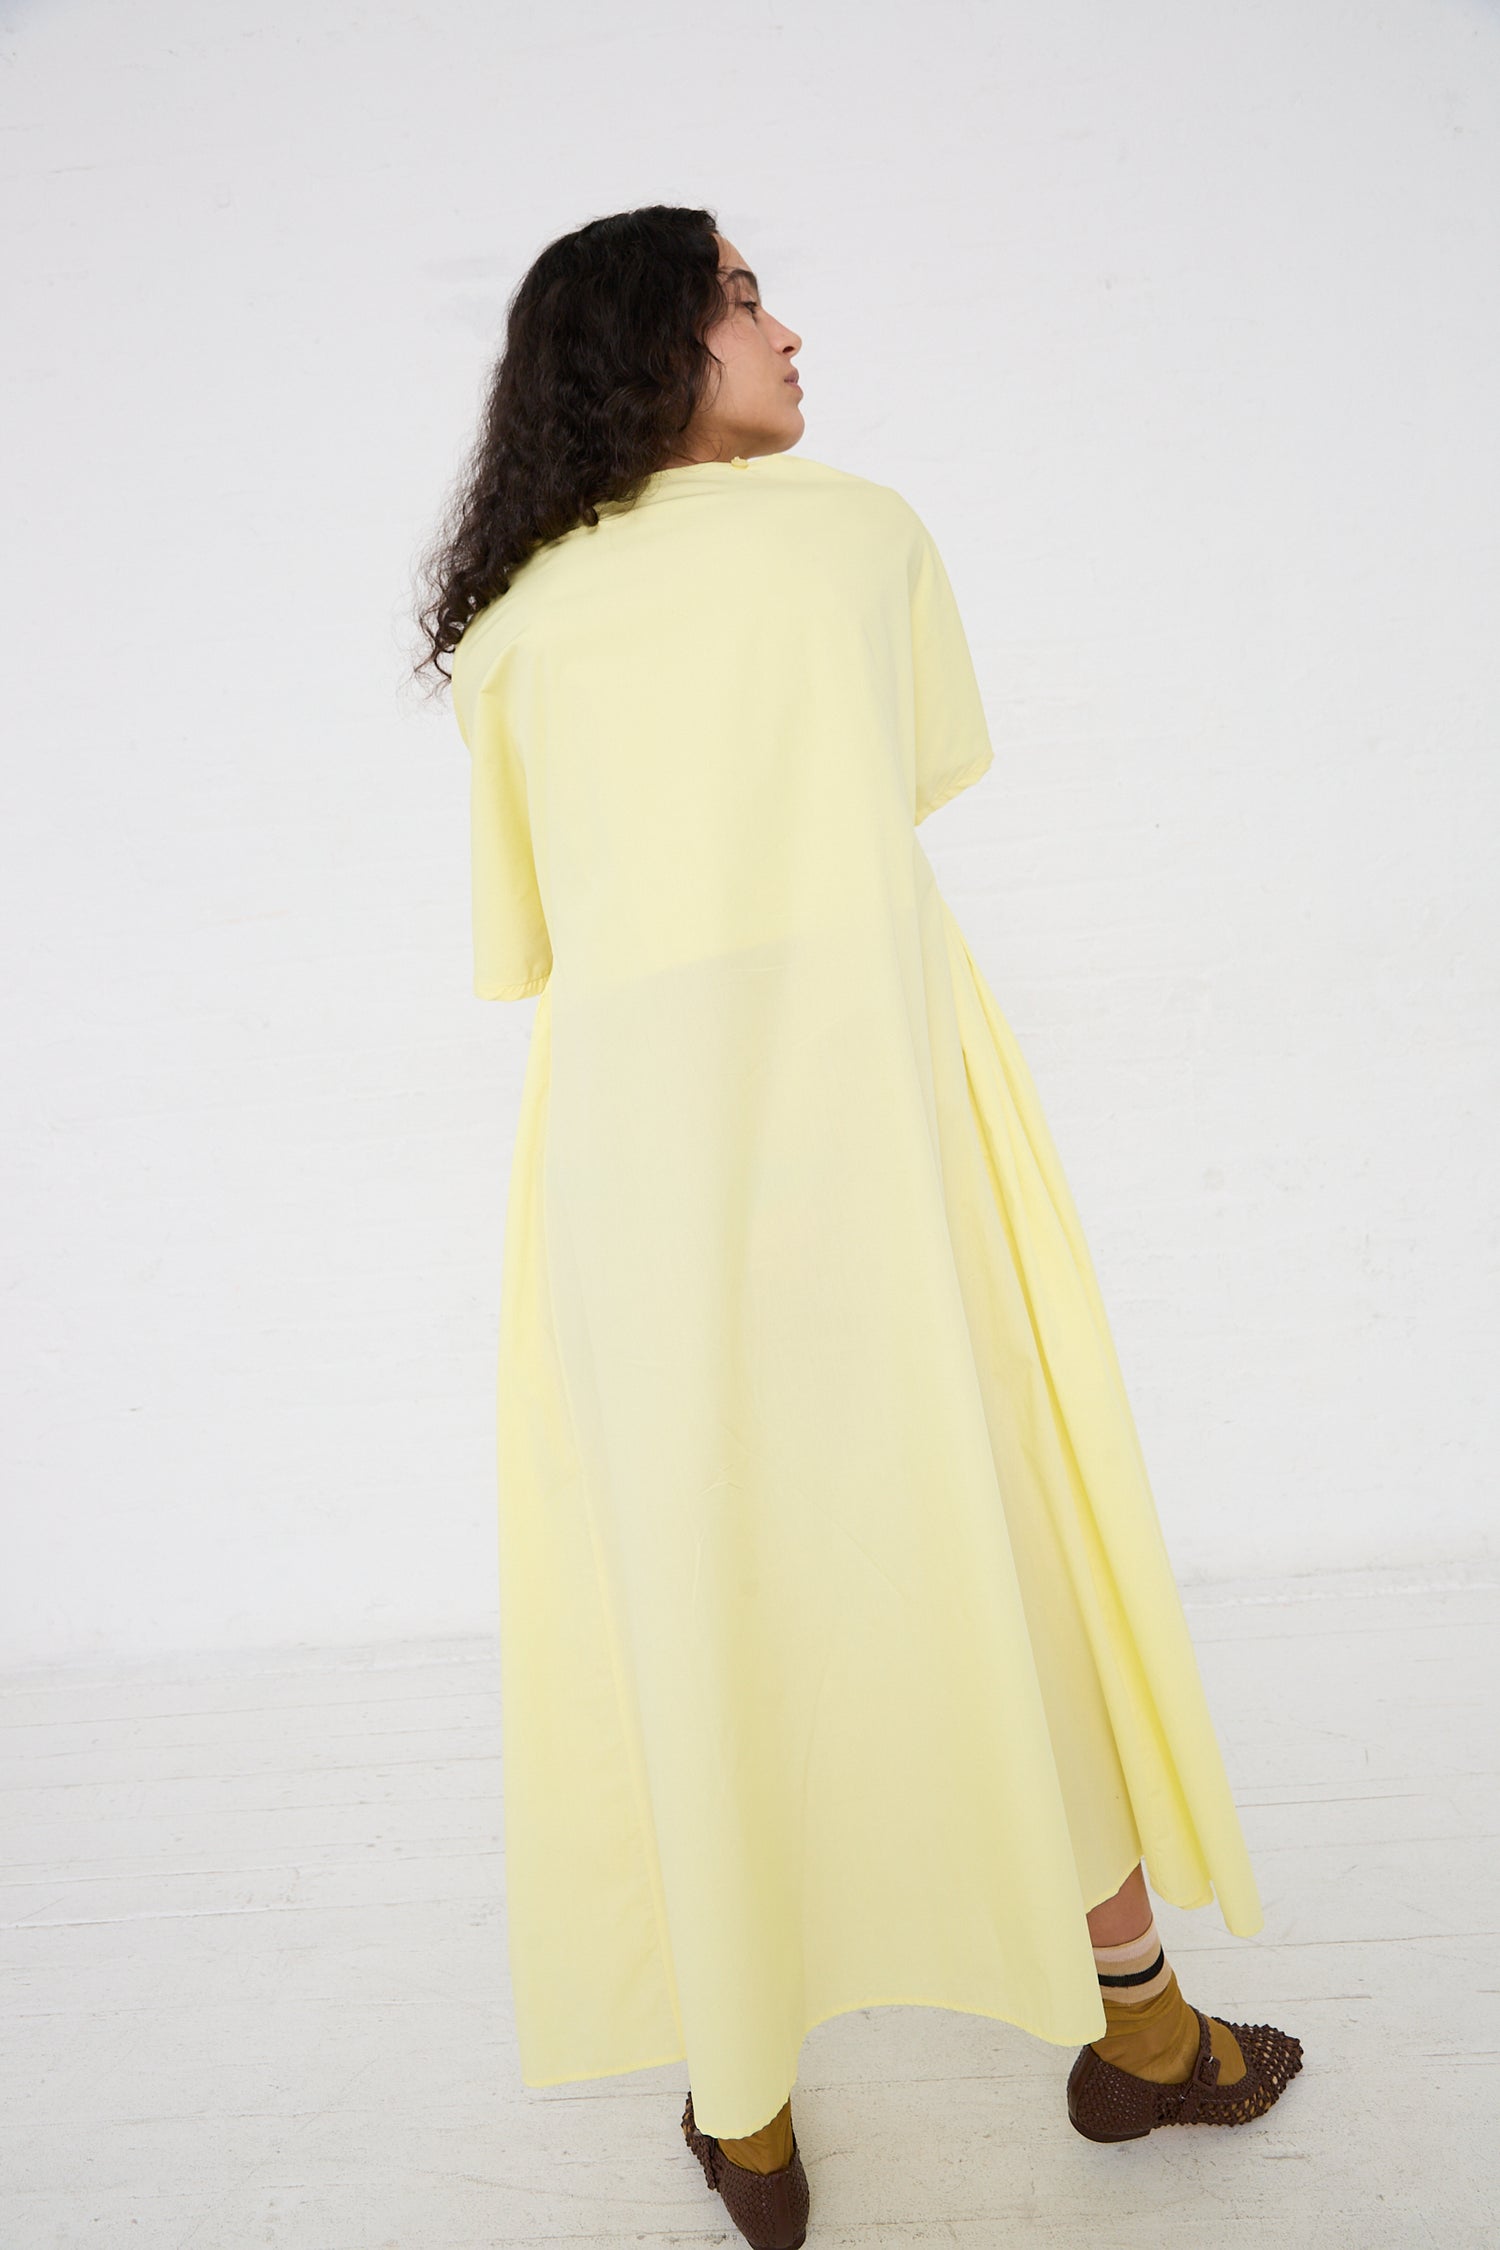 Woman in a yellow Black Crane Organic Cotton Star Neck Dress in Lemon looking over her shoulder against a white background.